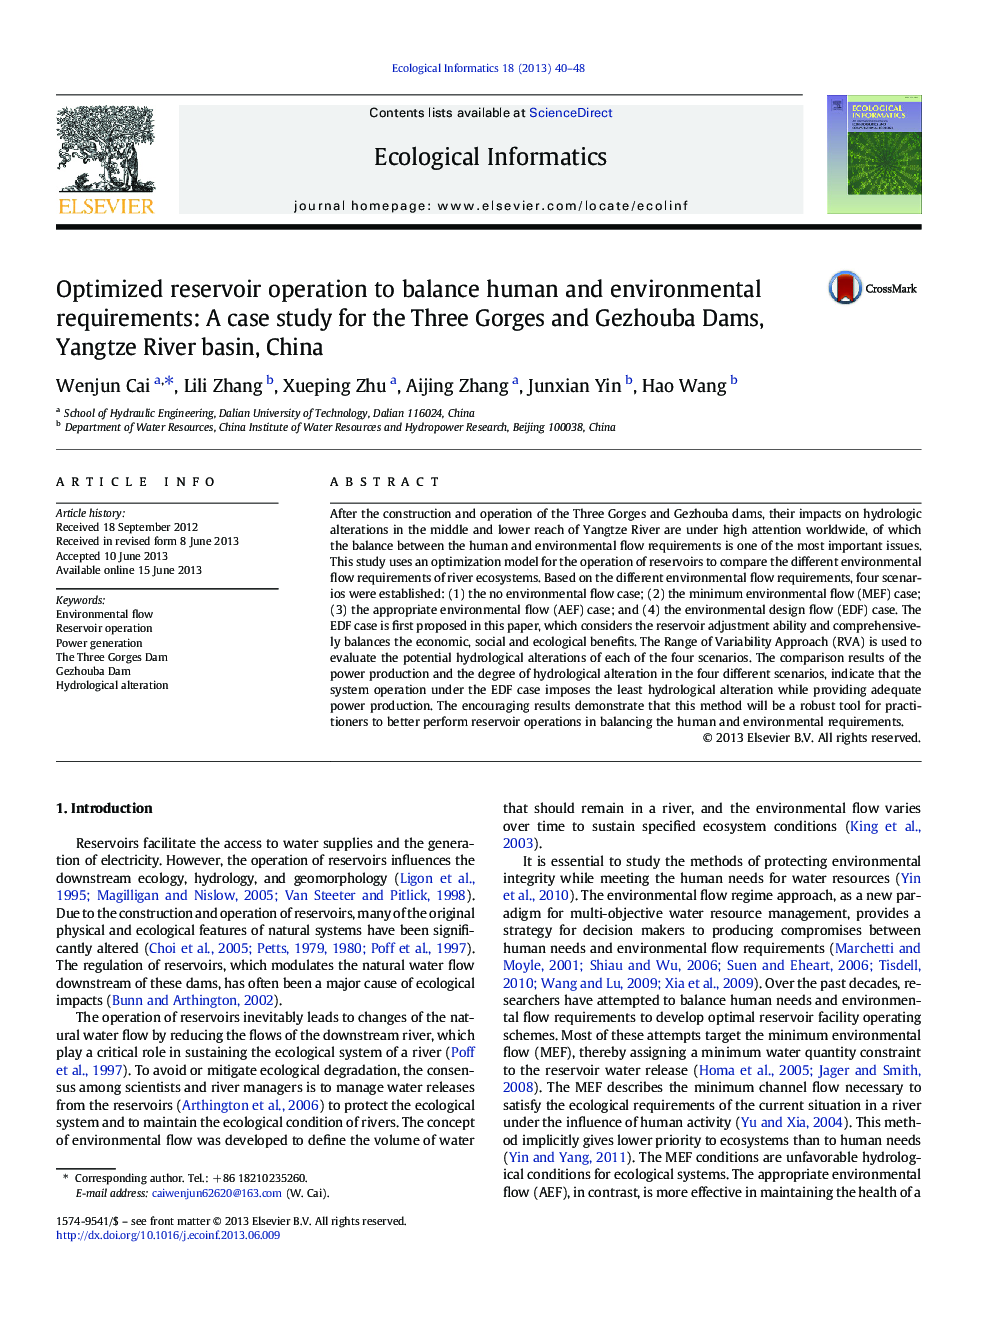 Optimized reservoir operation to balance human and environmental requirements: A case study for the Three Gorges and Gezhouba Dams, Yangtze River basin, China